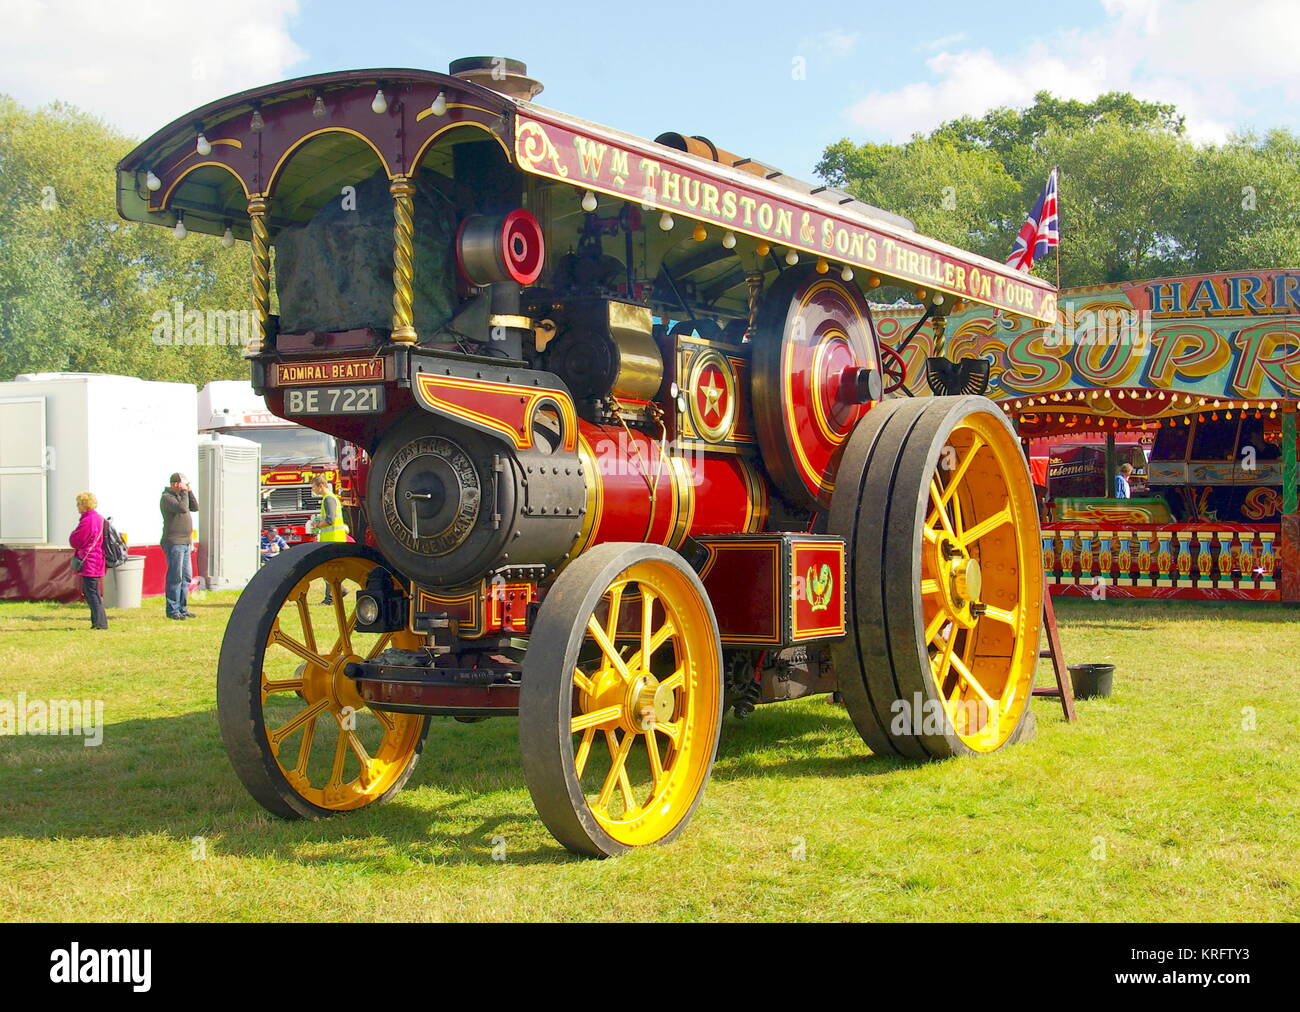 Welland Steam Fair, near Malvern, Worcestershire, with all kinds of farming vehicles and fairground engines on display. Seen here is a fairground engine with a fairground ride in the background. Stock Photo